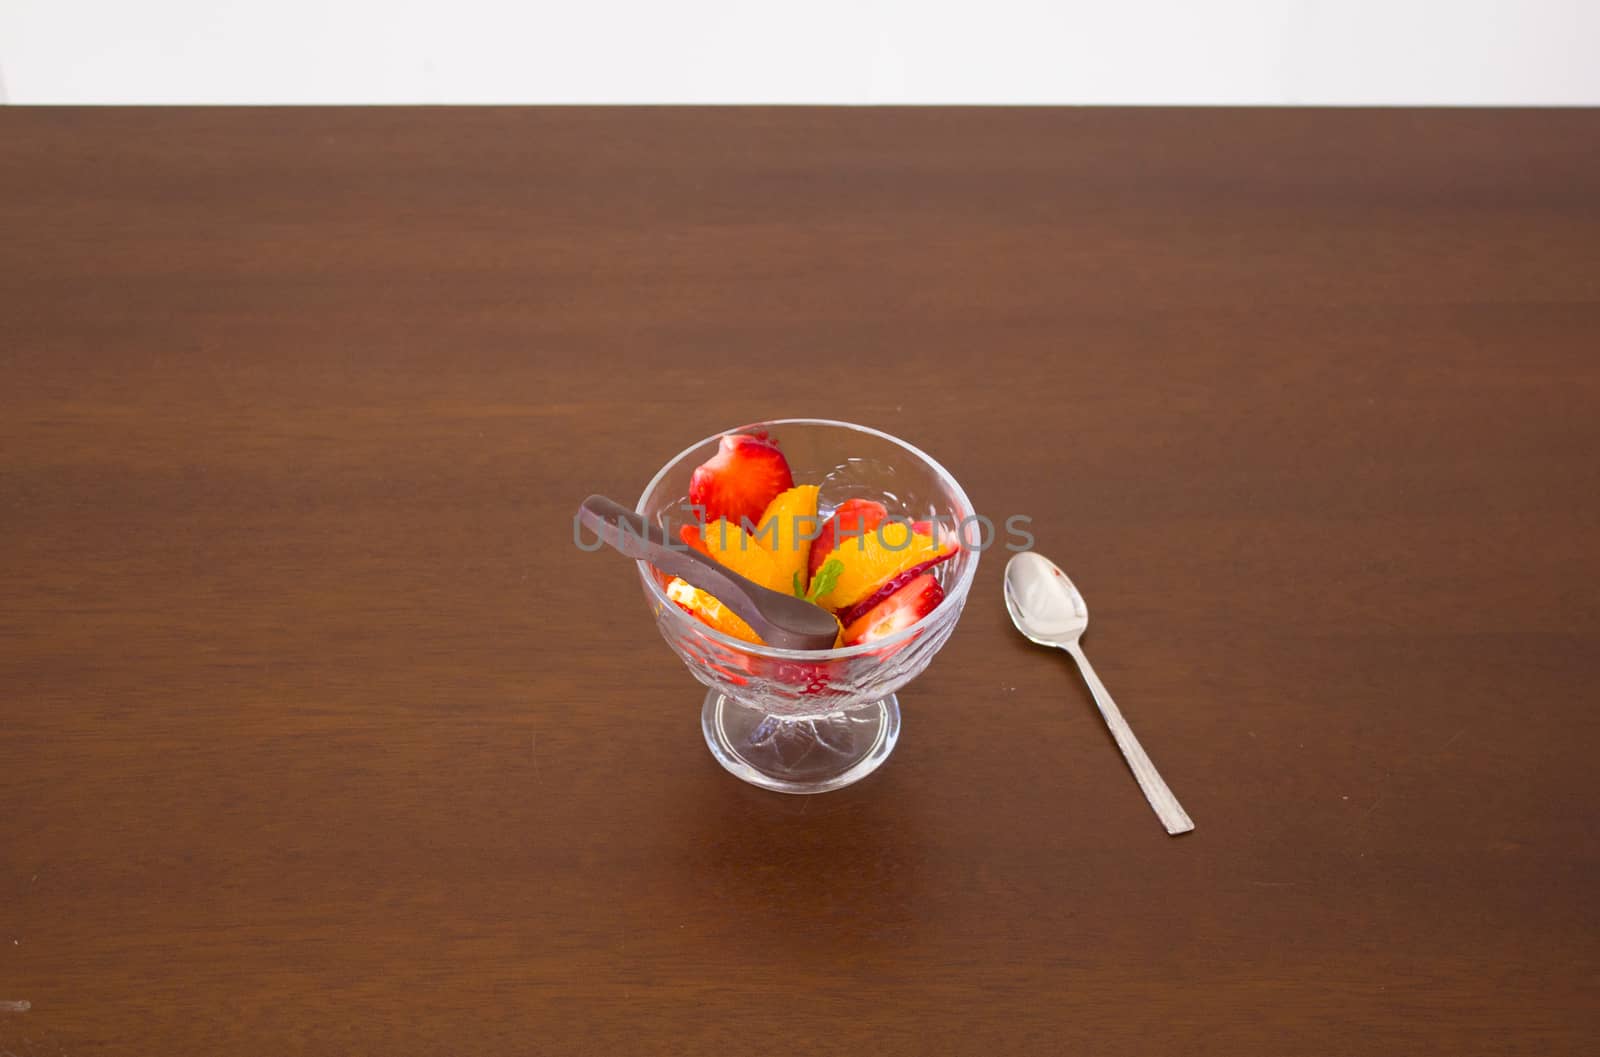 Salad fruit bowl with strawberries, orange and a chocolate spoon for dessert